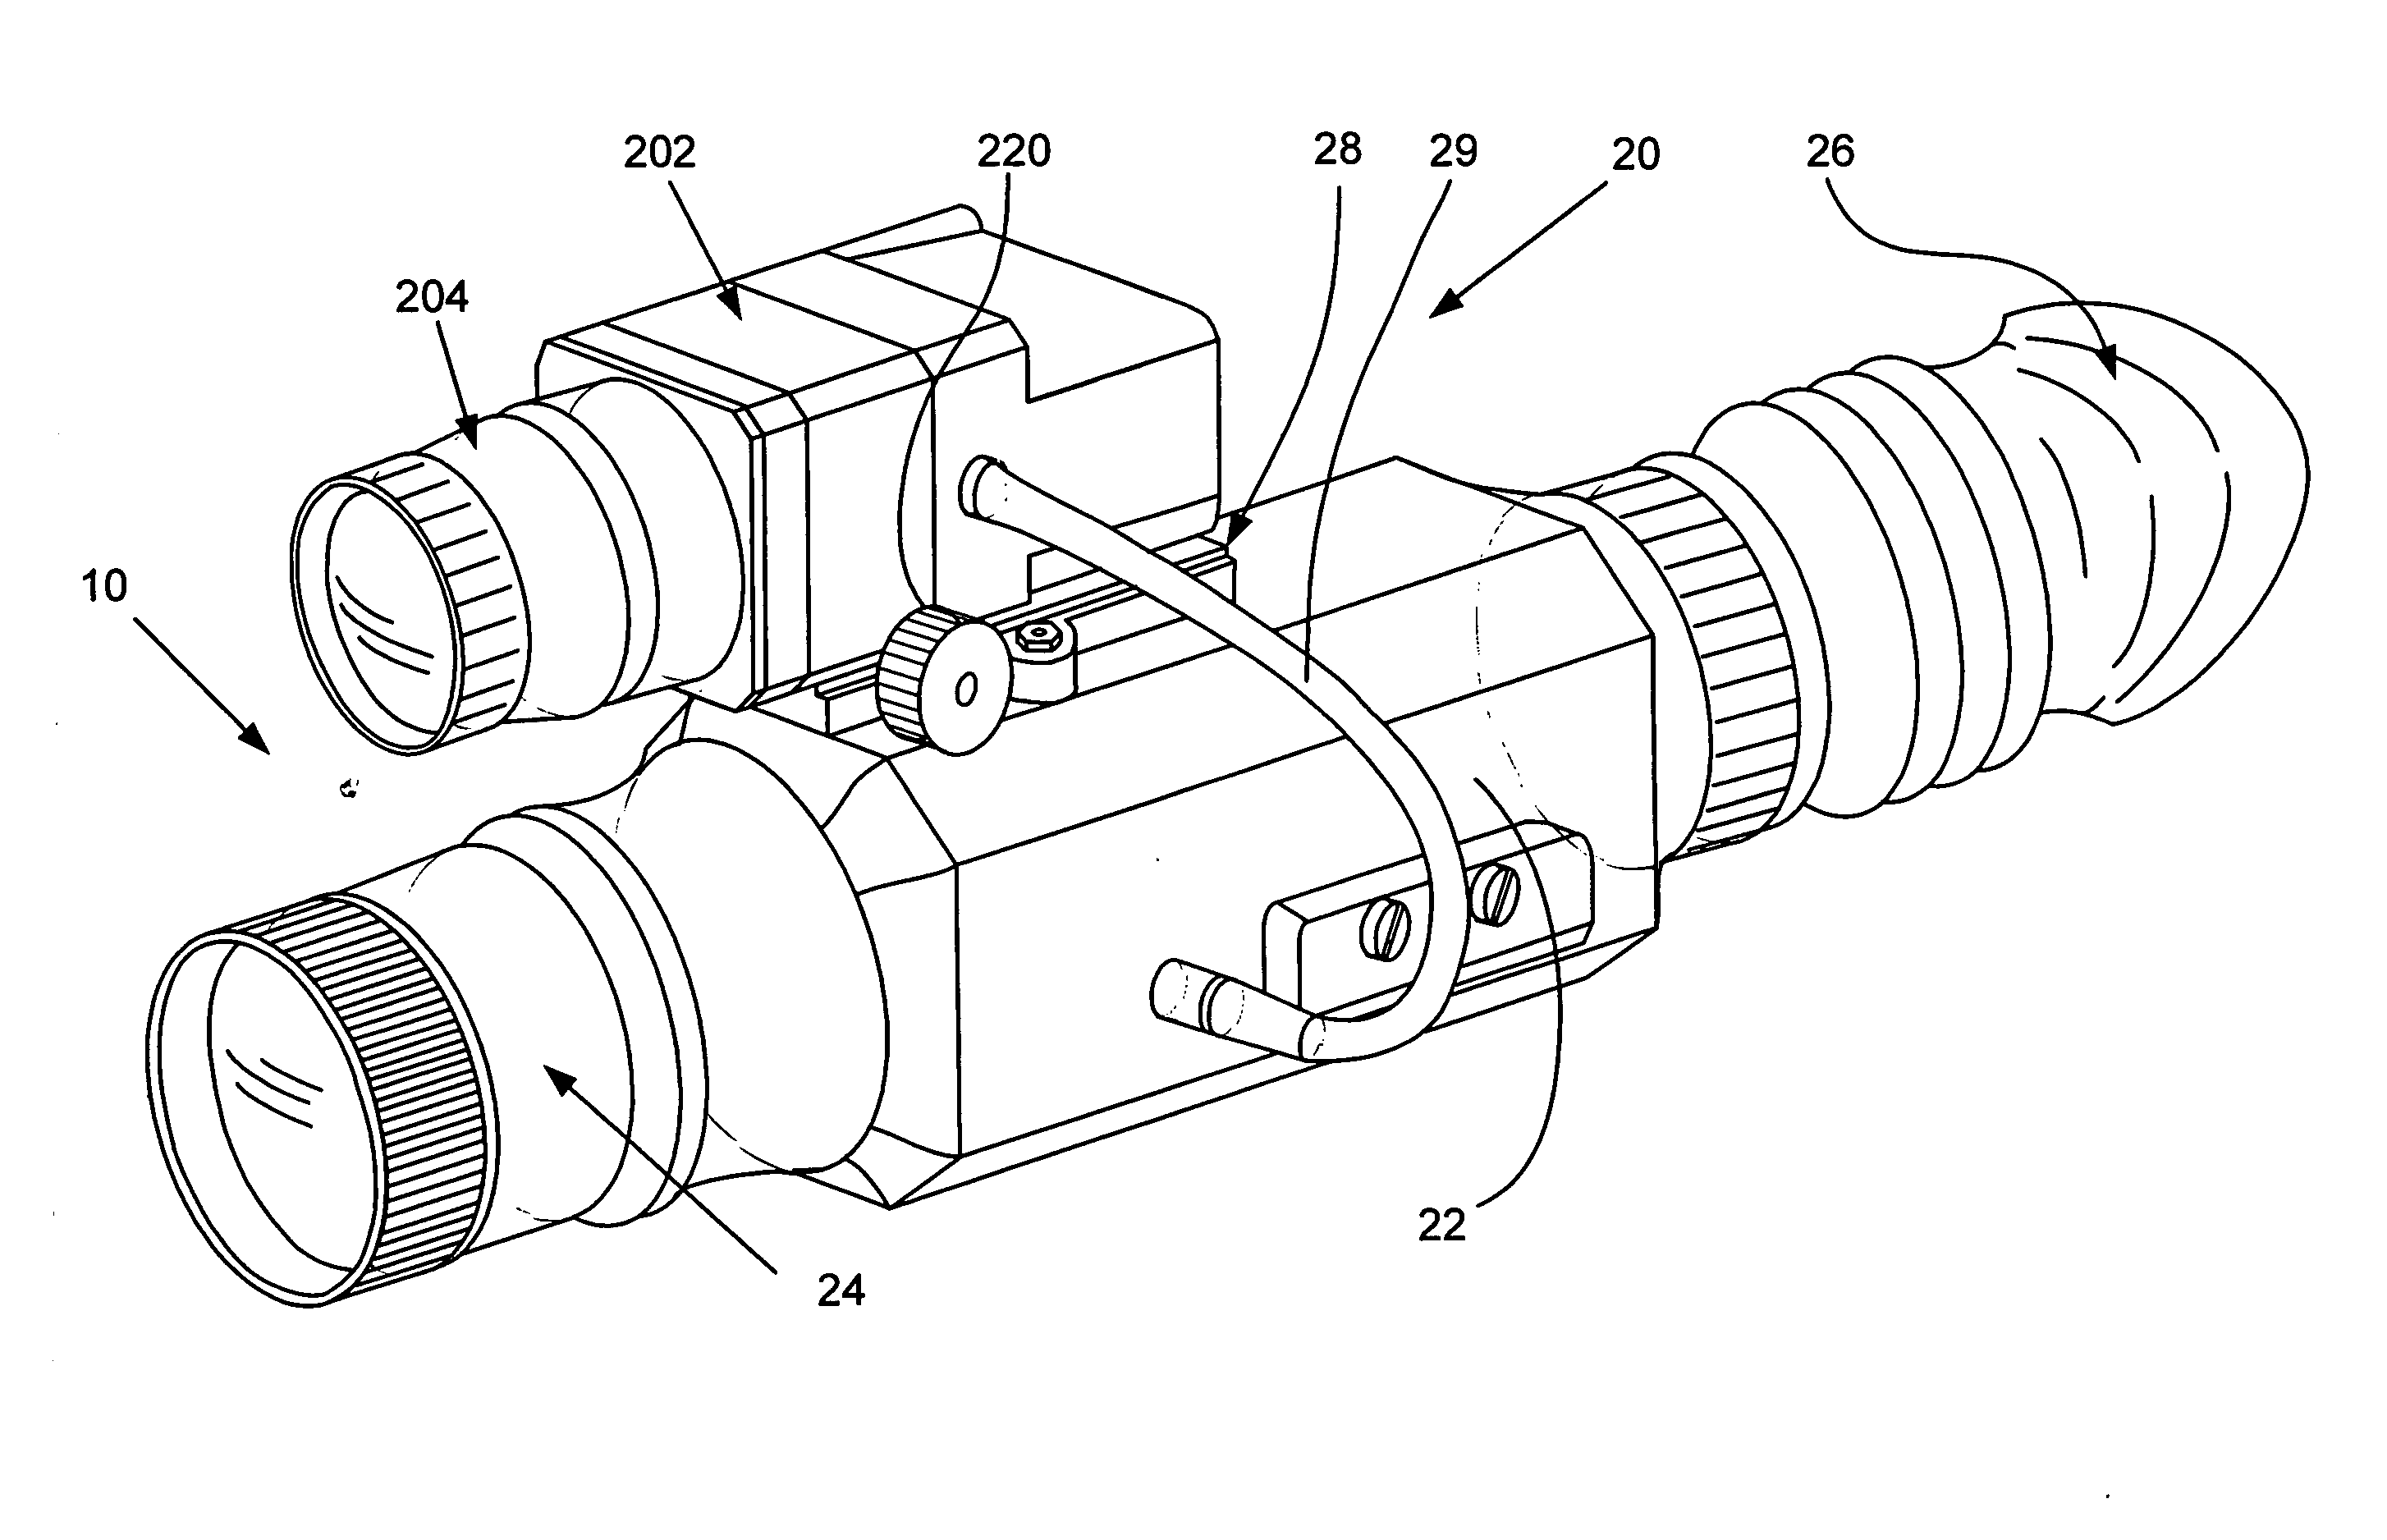 Optical system with automatic switching between operation in daylight and thermovision modes